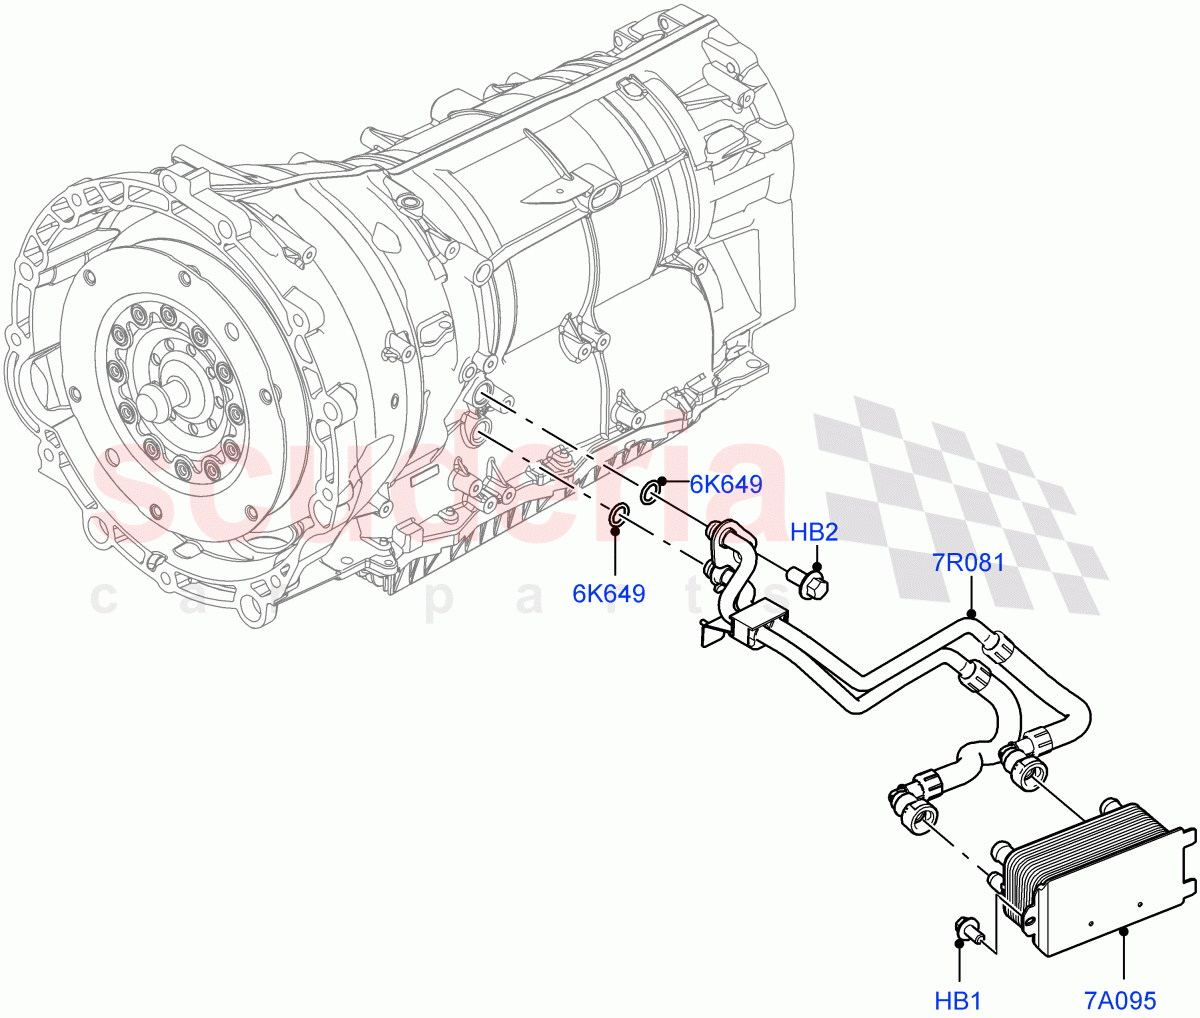 Transmission Cooling Systems(Nitra Plant Build)(3.0L AJ20P6 Petrol High,8 Speed Auto Trans ZF 8HP76,3.0L AJ20D6 Diesel High) of Land Rover Land Rover Defender (2020+) [3.0 I6 Turbo Diesel AJ20D6]